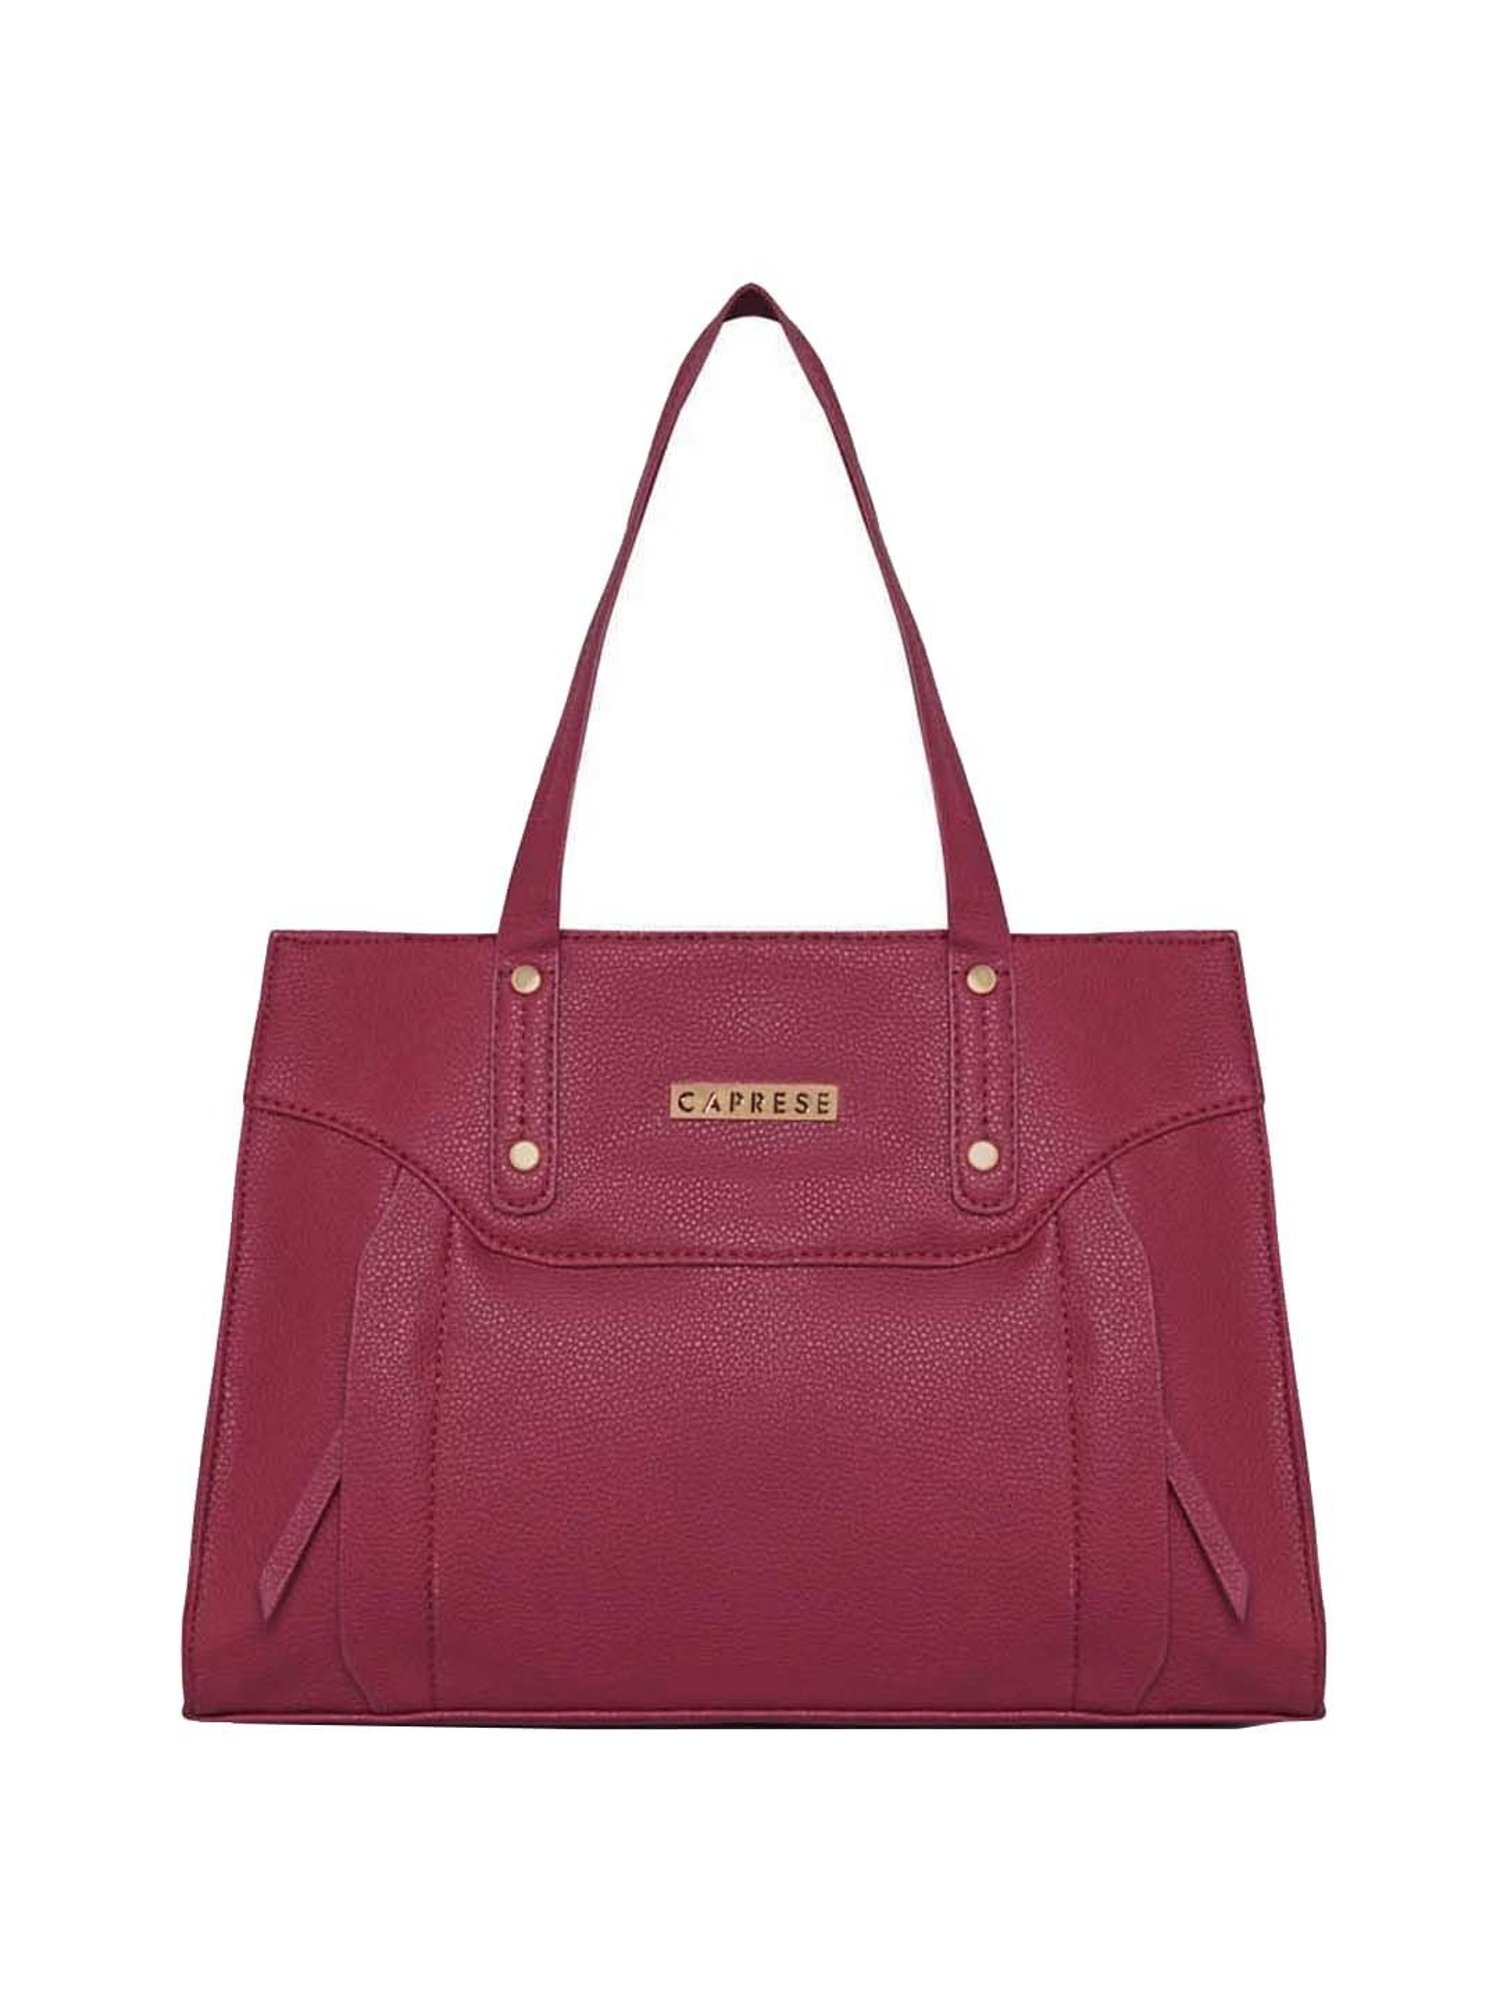 Caprese Womens Debra Satchel Bag Price Starting From Rs 2,715 | Find  Verified Sellers at Justdial